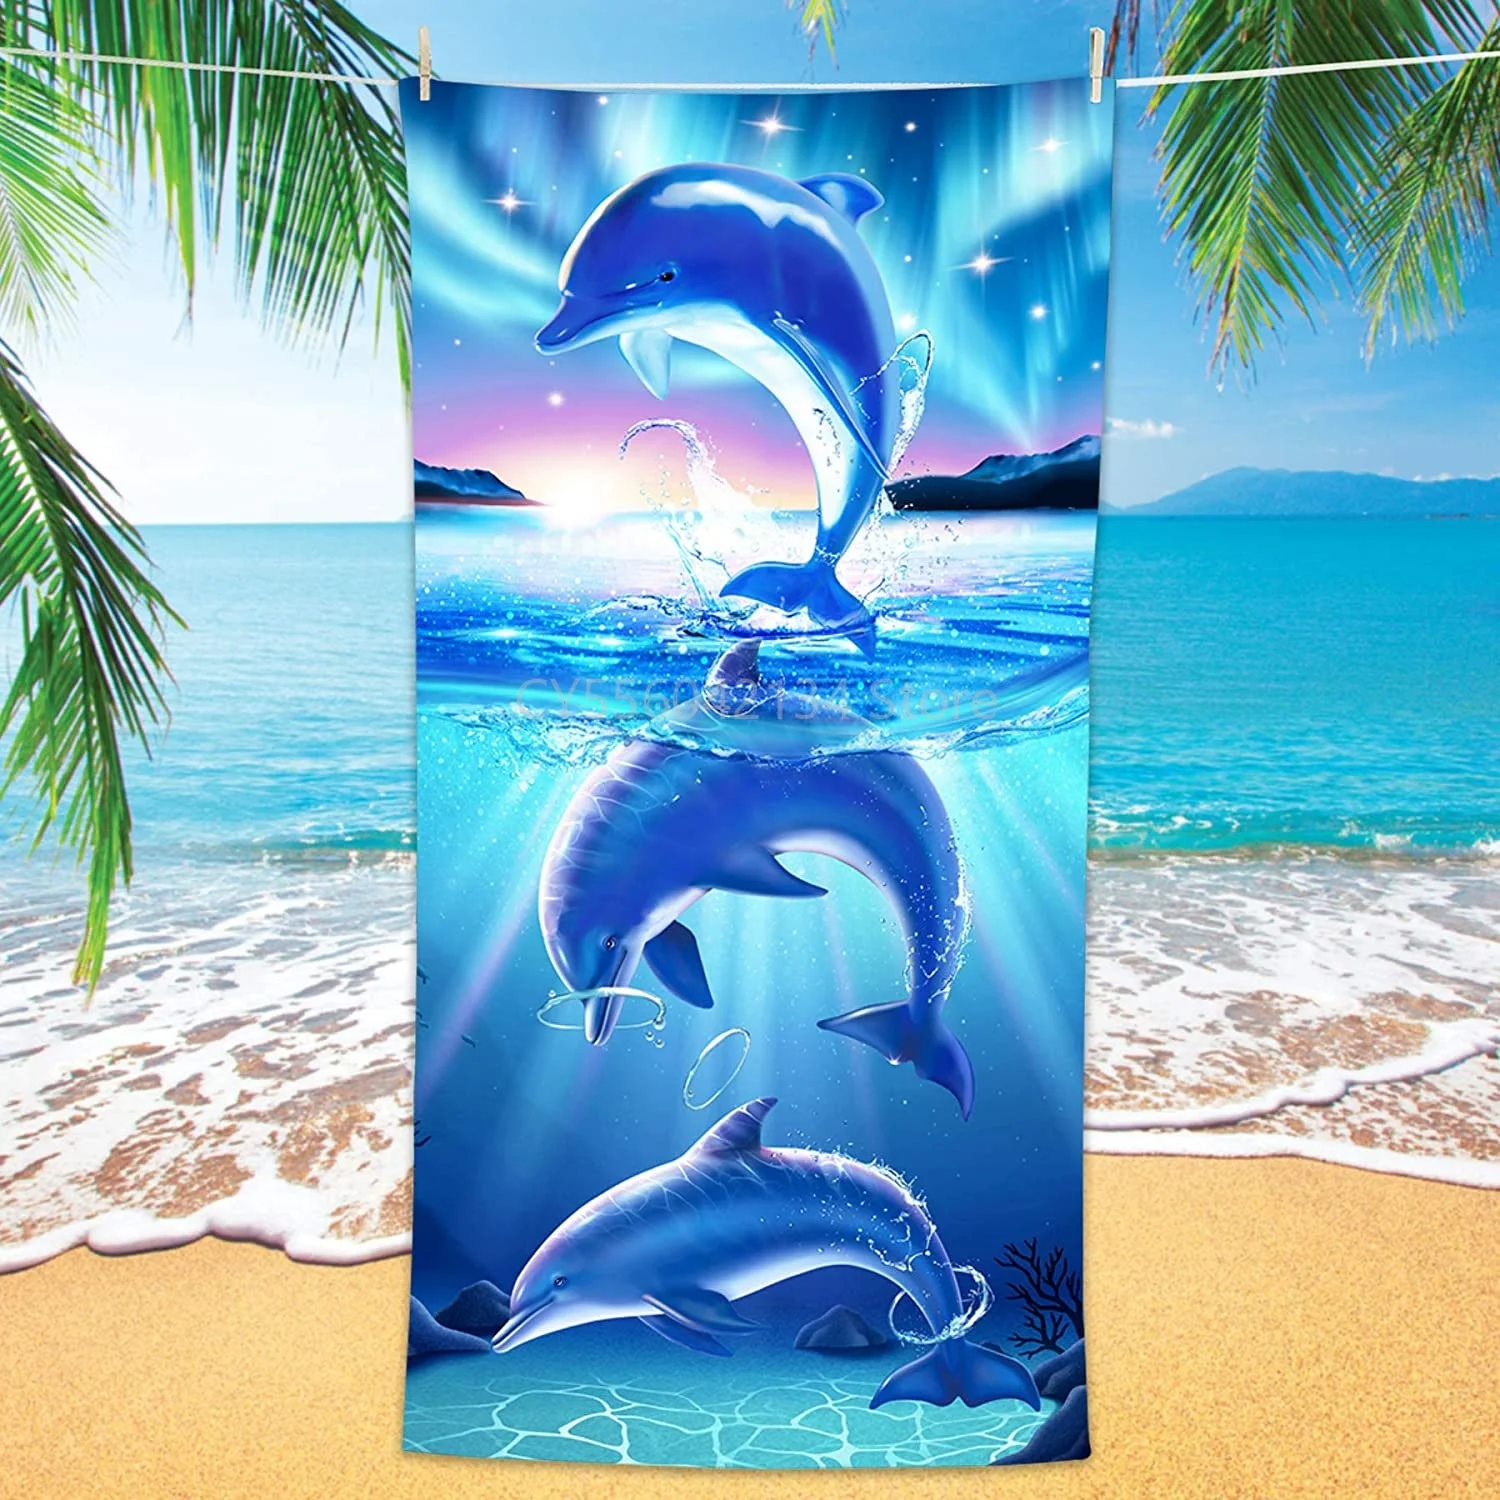 

Cute Ocean Dolphins Themed Microfiber Bath Towel Gifts for Kids, Sand Free Quick Dry Travel Towels for Boys Girls Pool Sports